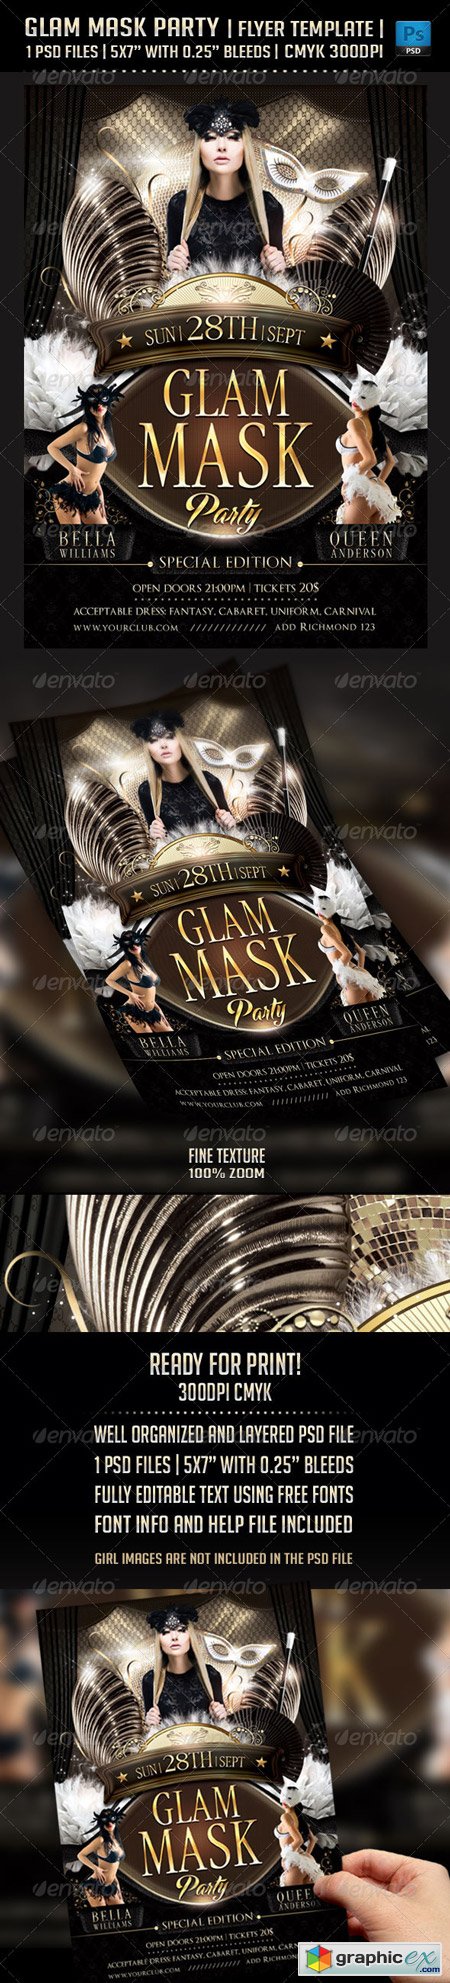 Glam Mask Party Flyer Template